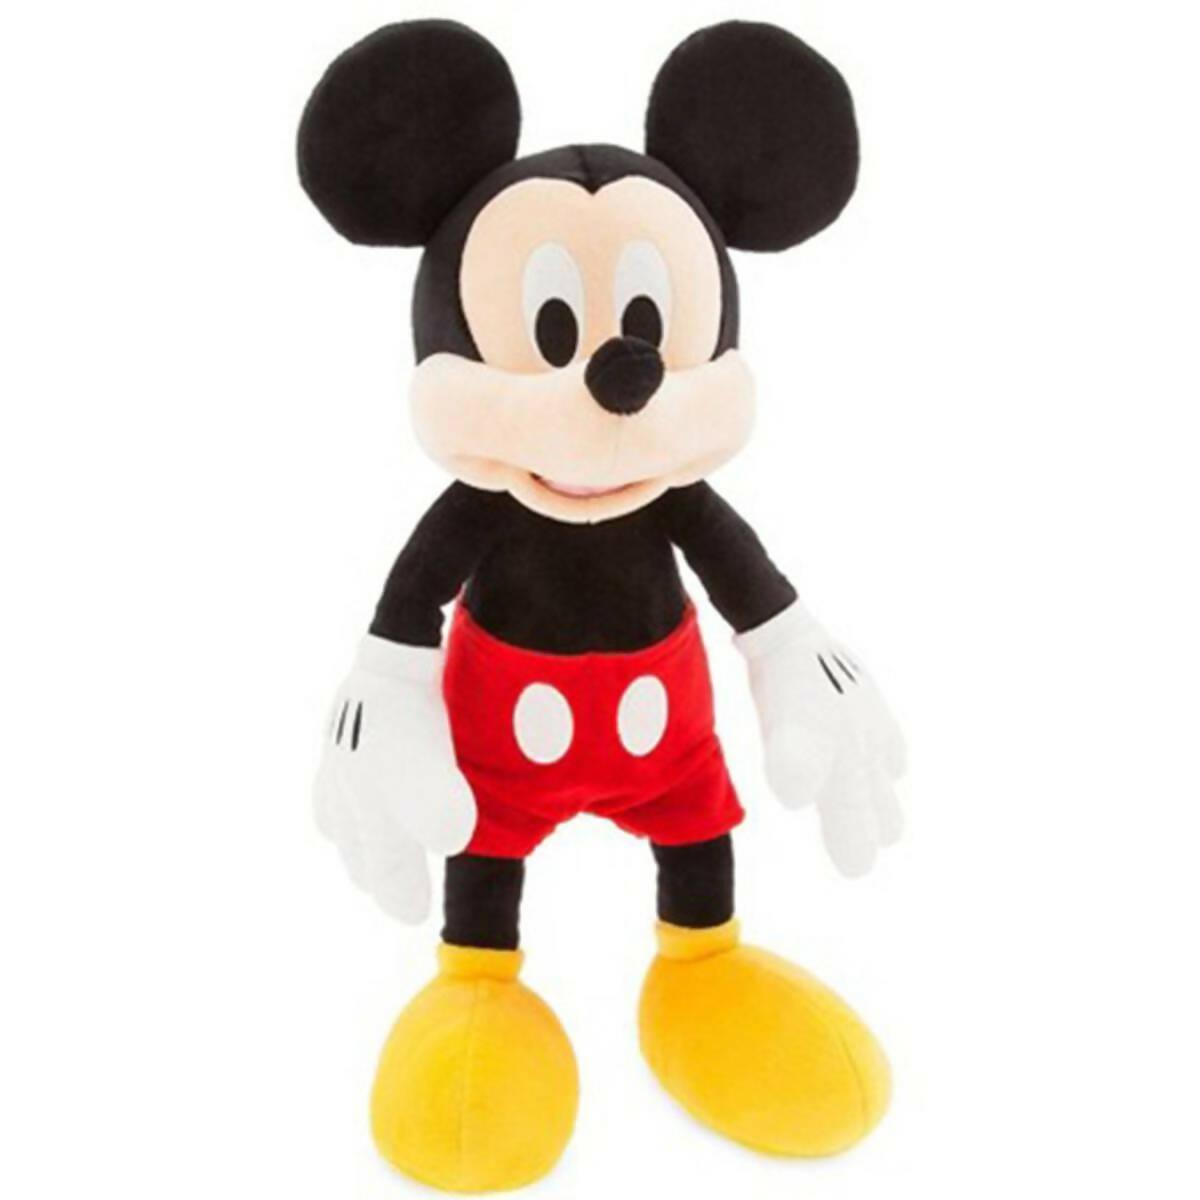 Disney - Mickey Mouse Clubhouse Stuffed Toy - 16 inch size - ValueBox